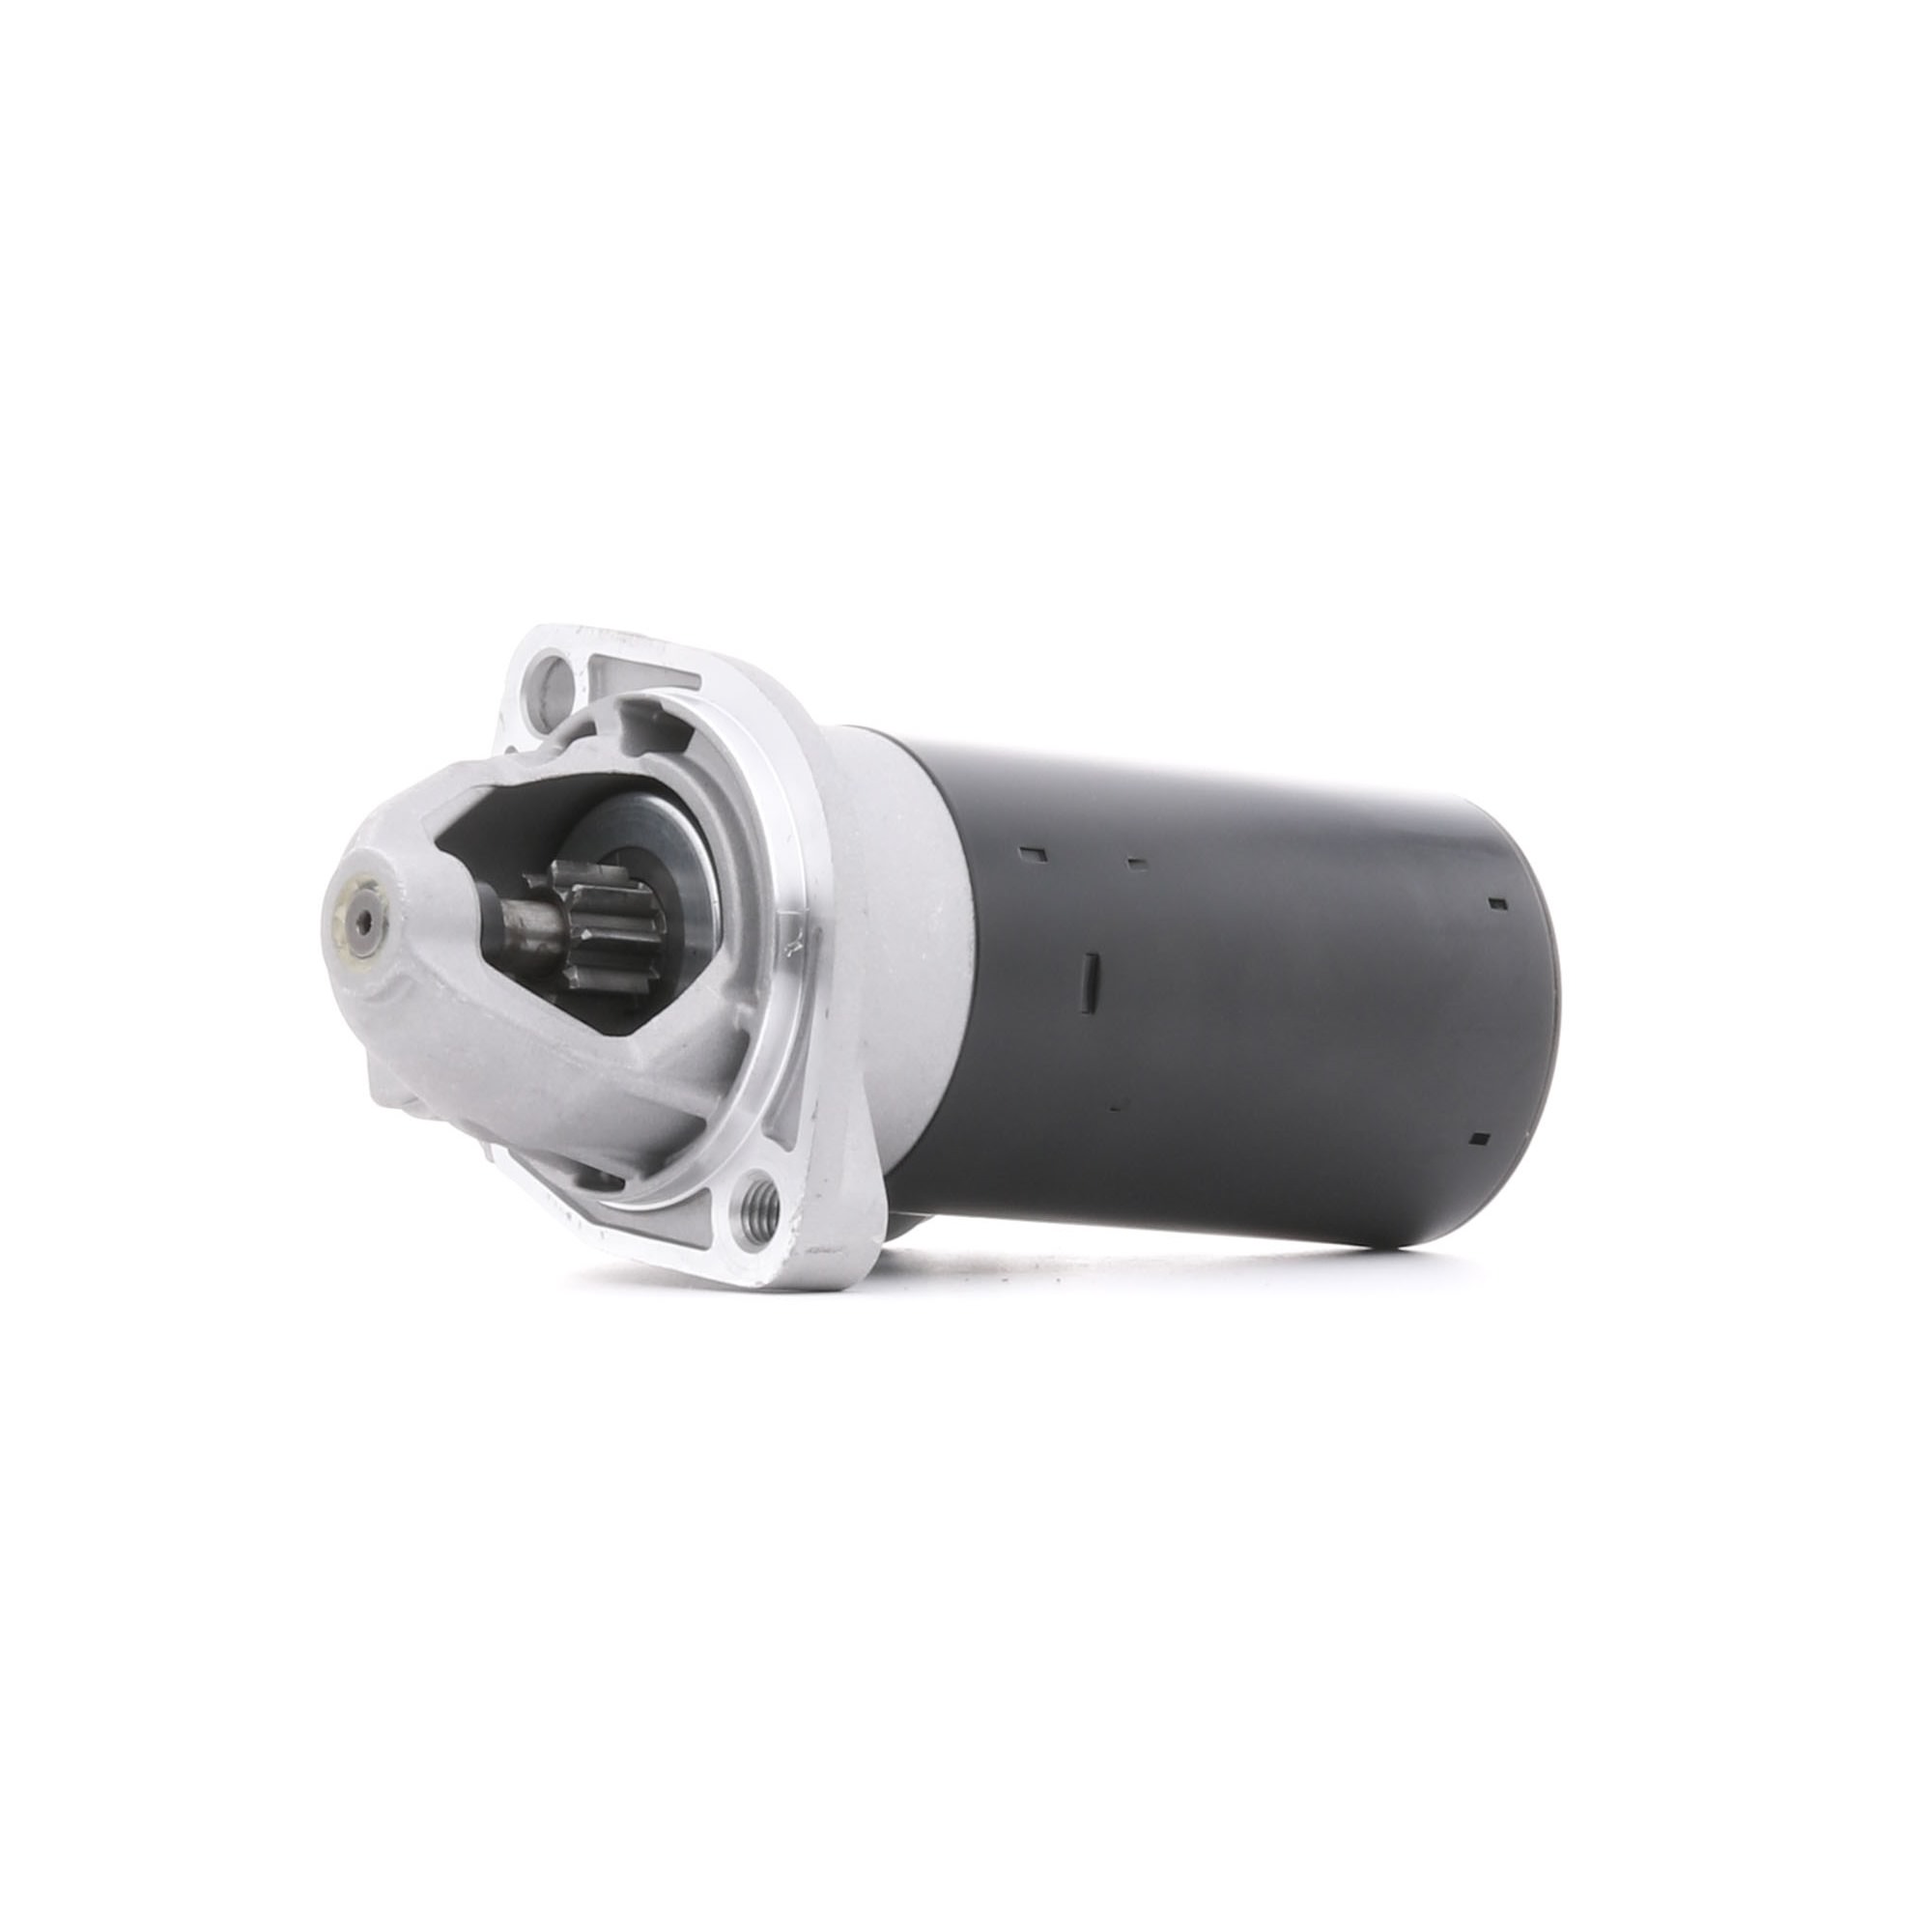 RIDEX 2S0404 Starter motor 12V, 2kW, with 50(Jet) clamp